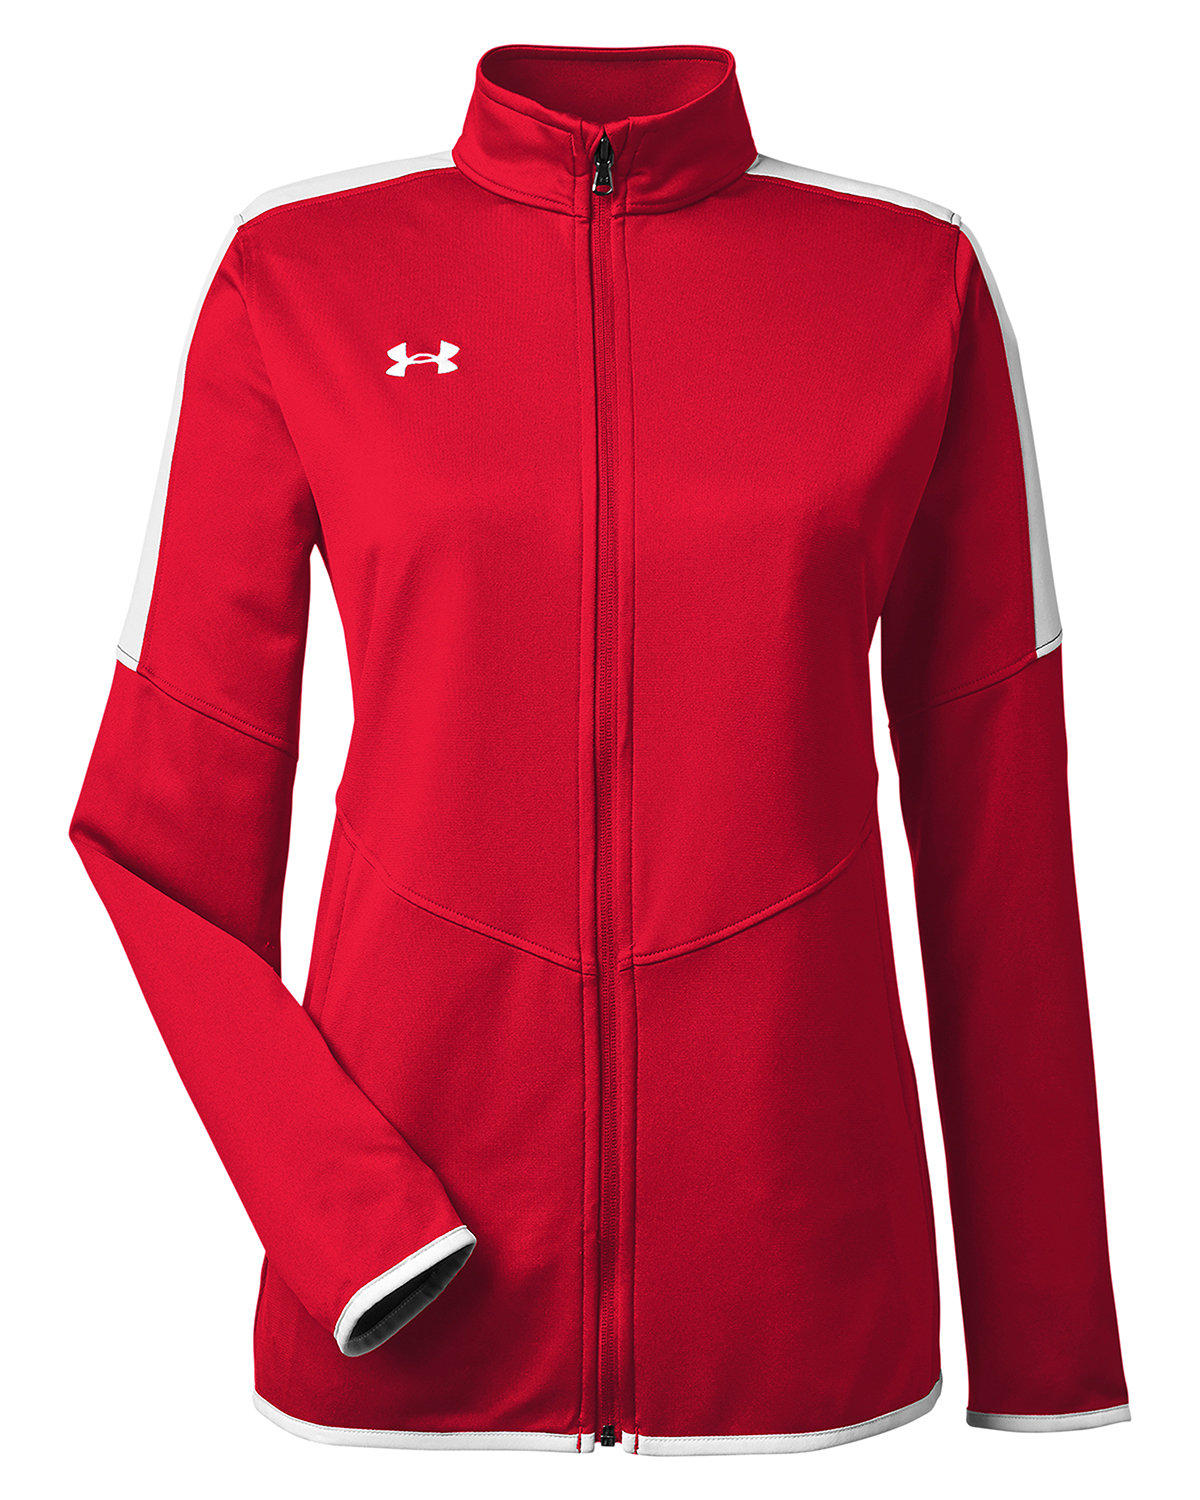 Branded Under Armour Ladies’ Rival Knit Jacket Red